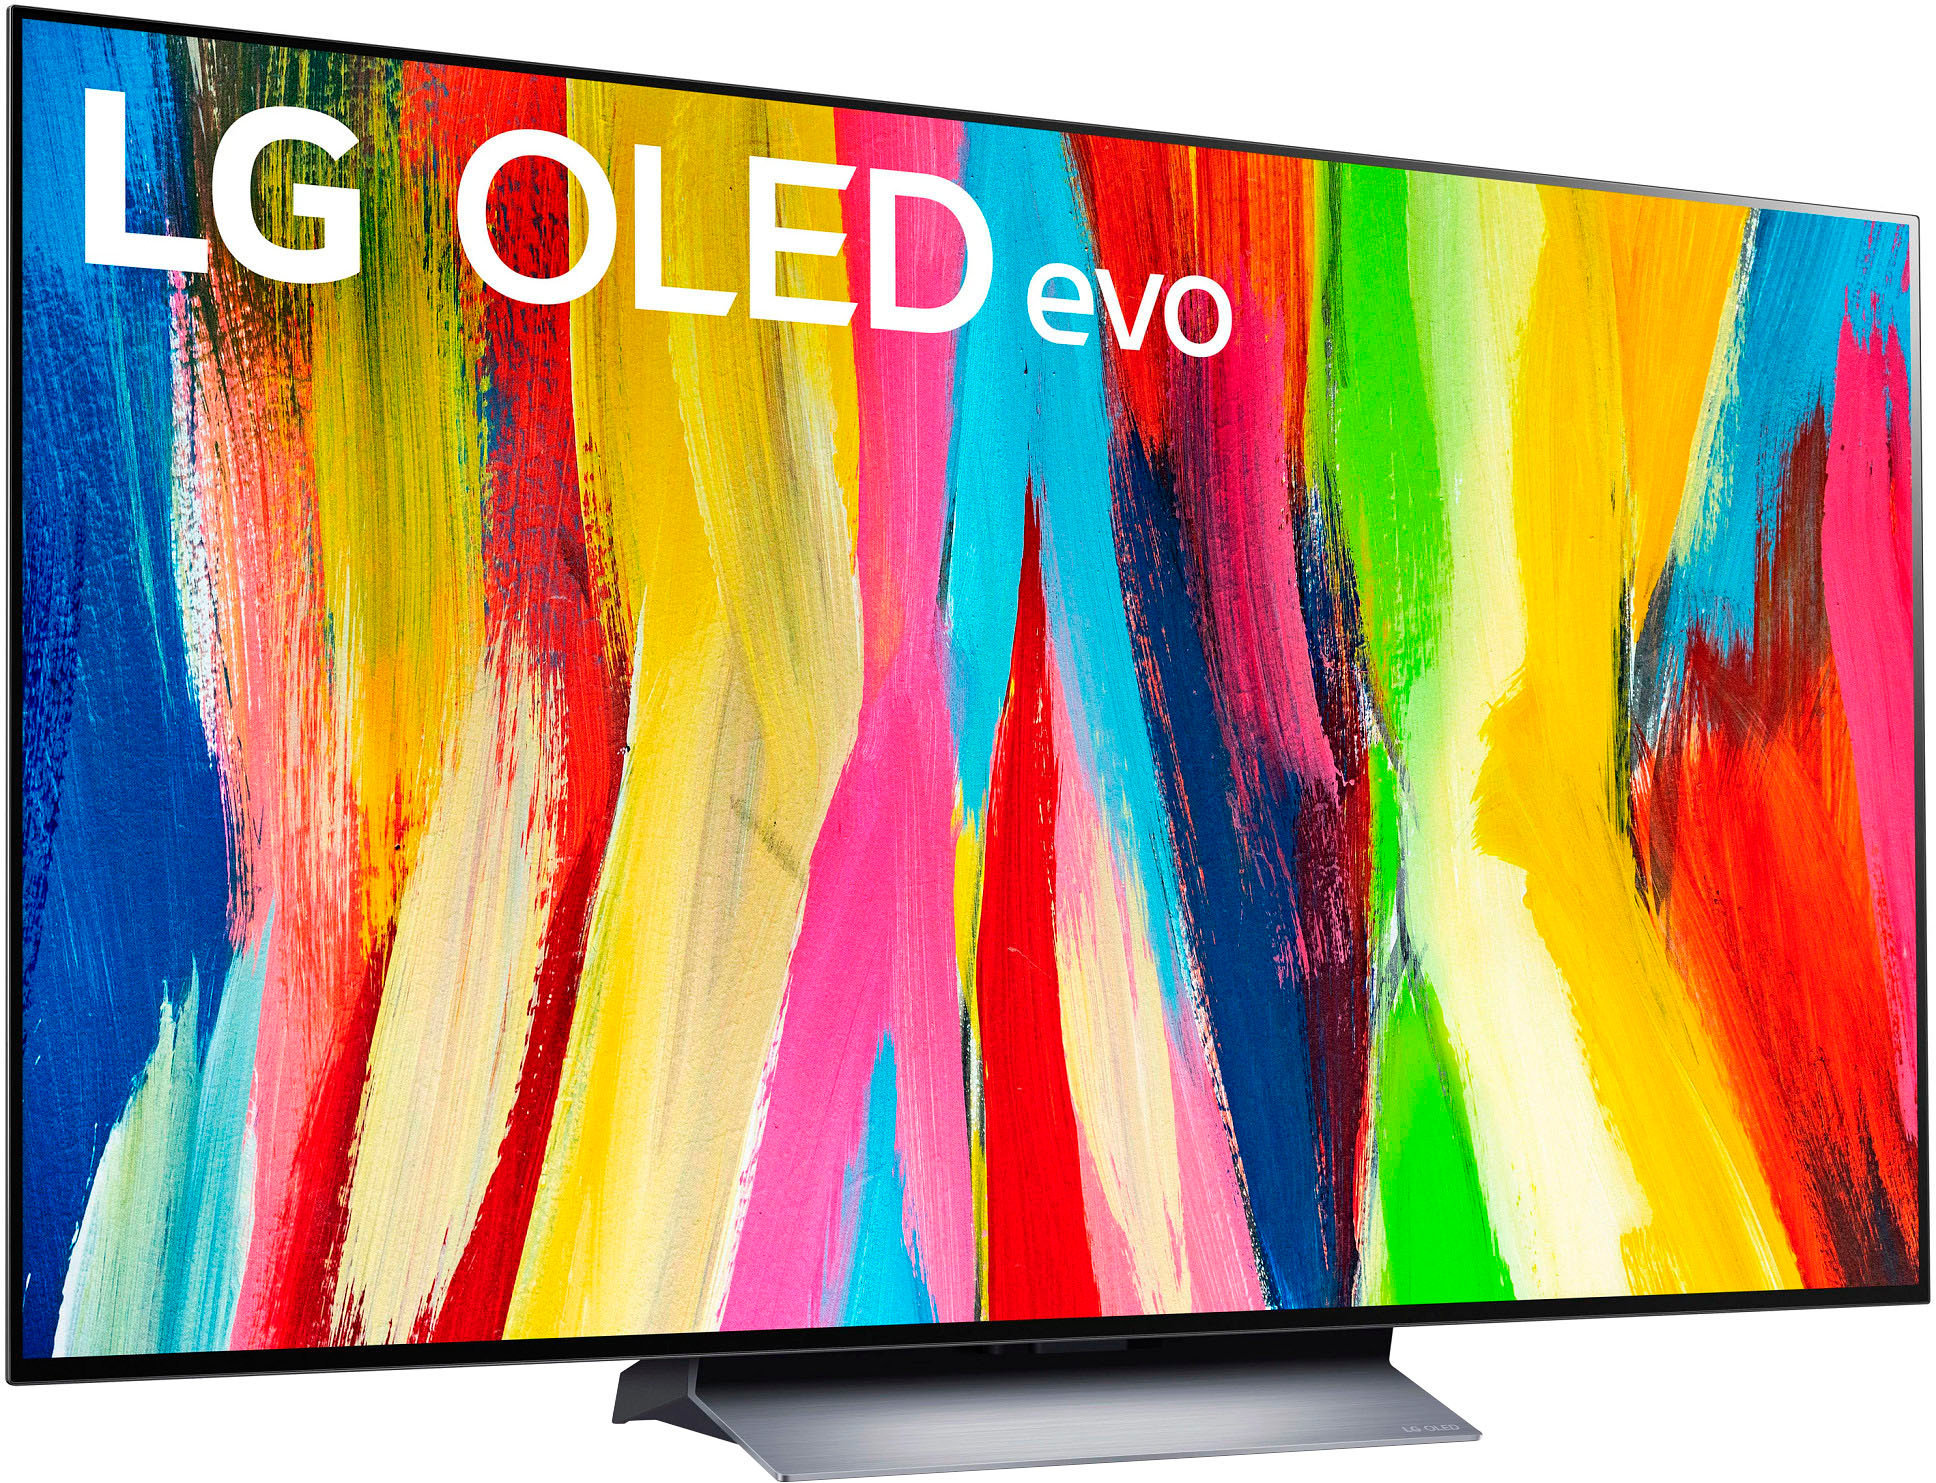 LG 127 cm (50 inch) Ultra HD (4K) LED Smart WebOS TV Online at best Prices  In India